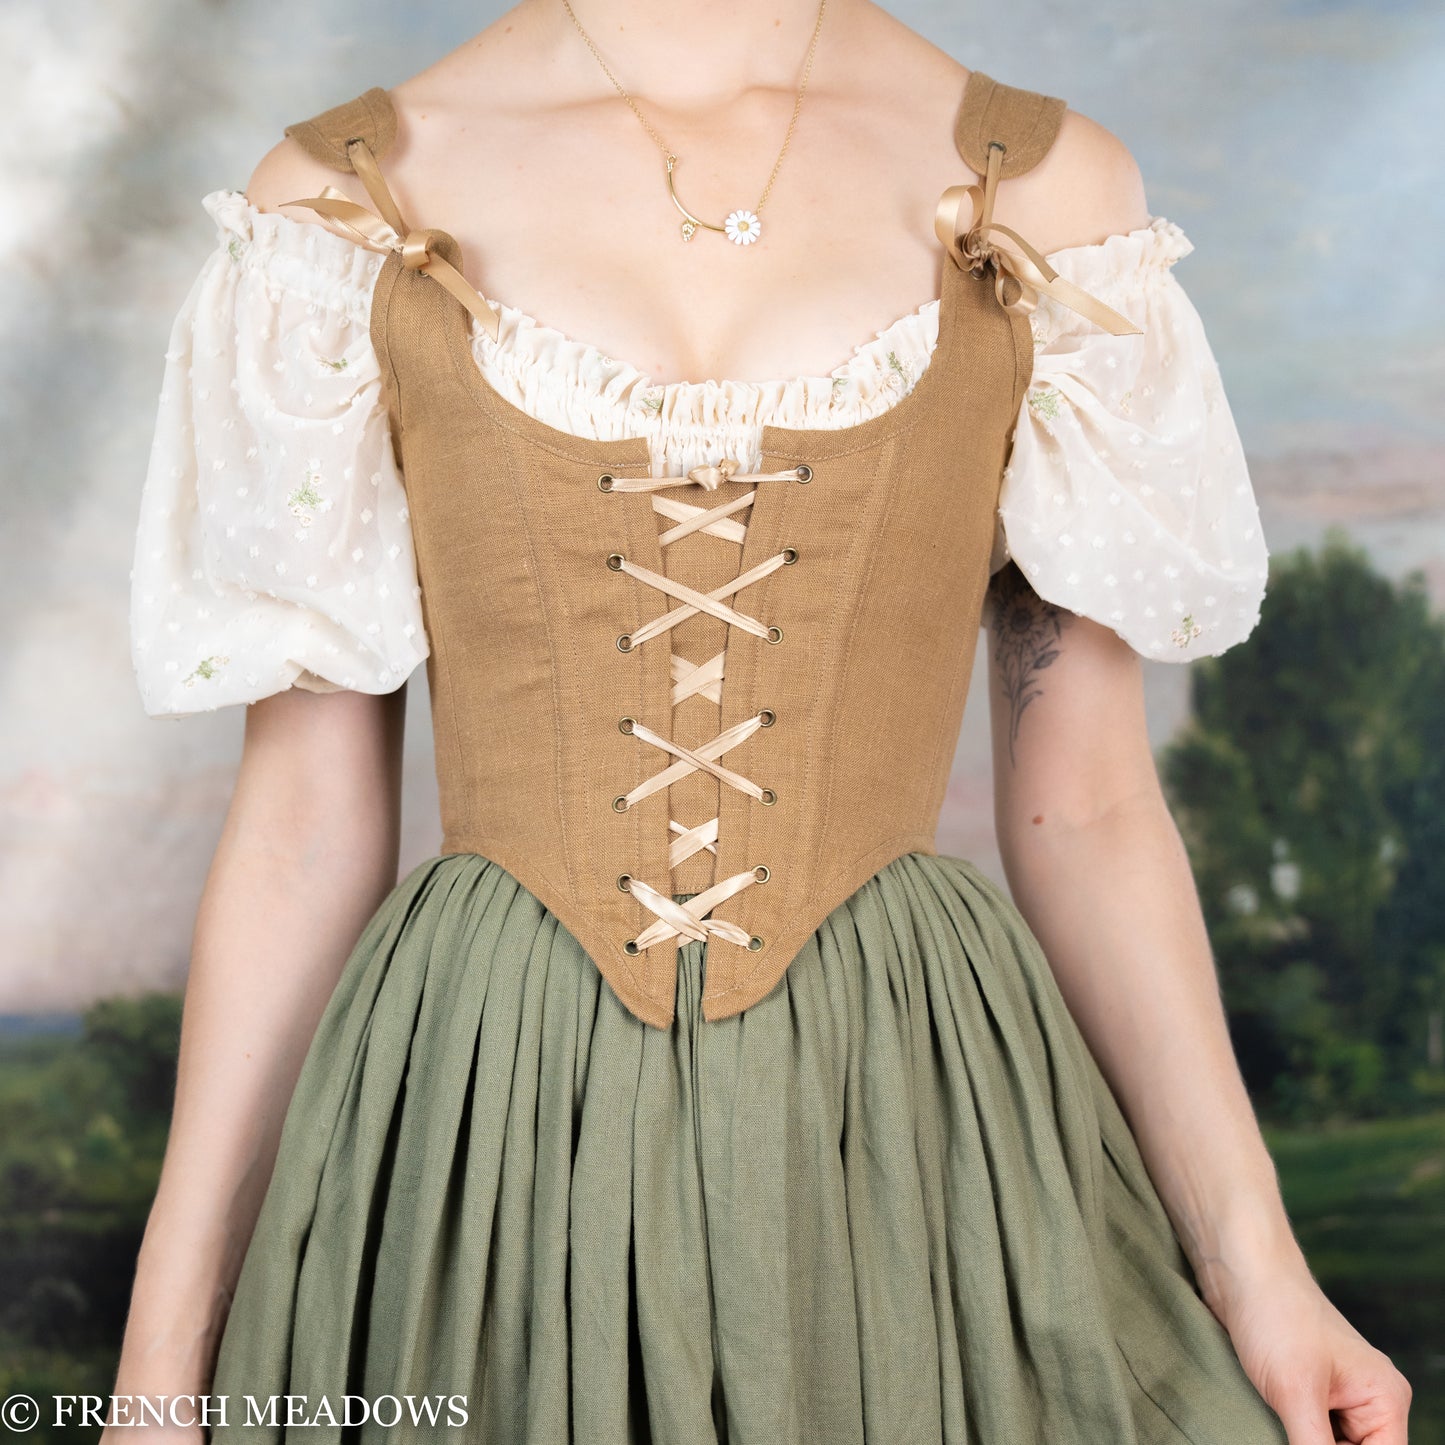 Renaissance Corset Bodice Stays in Ivory Brown Toile Du Jouy Corset Top  Cottage Core French Light Academia With Straps Bustier Costume -  Canada